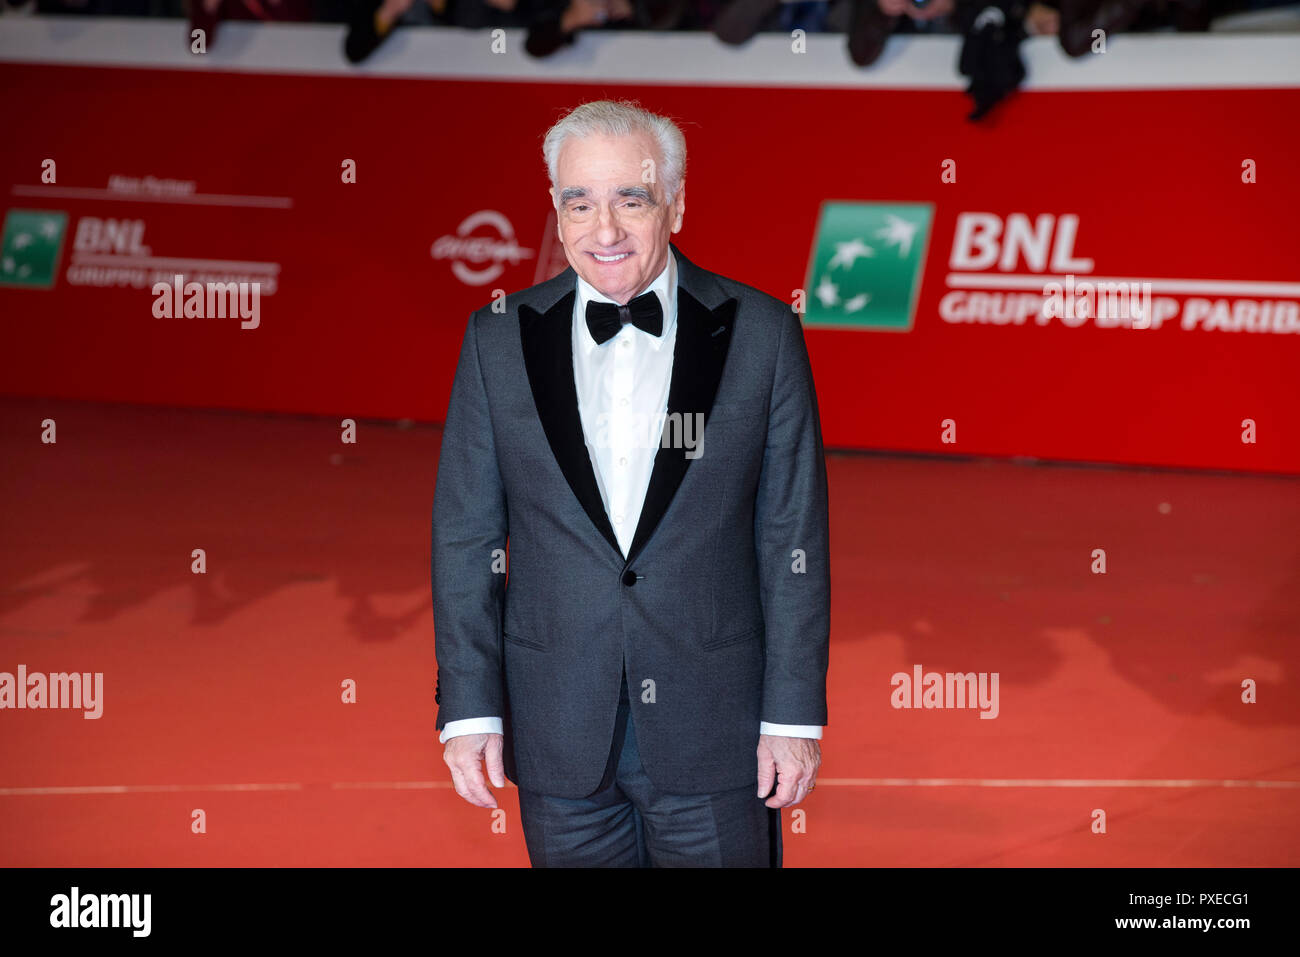 Rome, Italy. 22nd October, 2018. Rome, Italy. 22nd Oct, 2018. Martin Scorsese attending the red carpet during the 13th Rome Film Fest Credit: Silvia Gerbino/Alamy Live News Credit: Silvia Gerbino/Alamy Live News Stock Photo